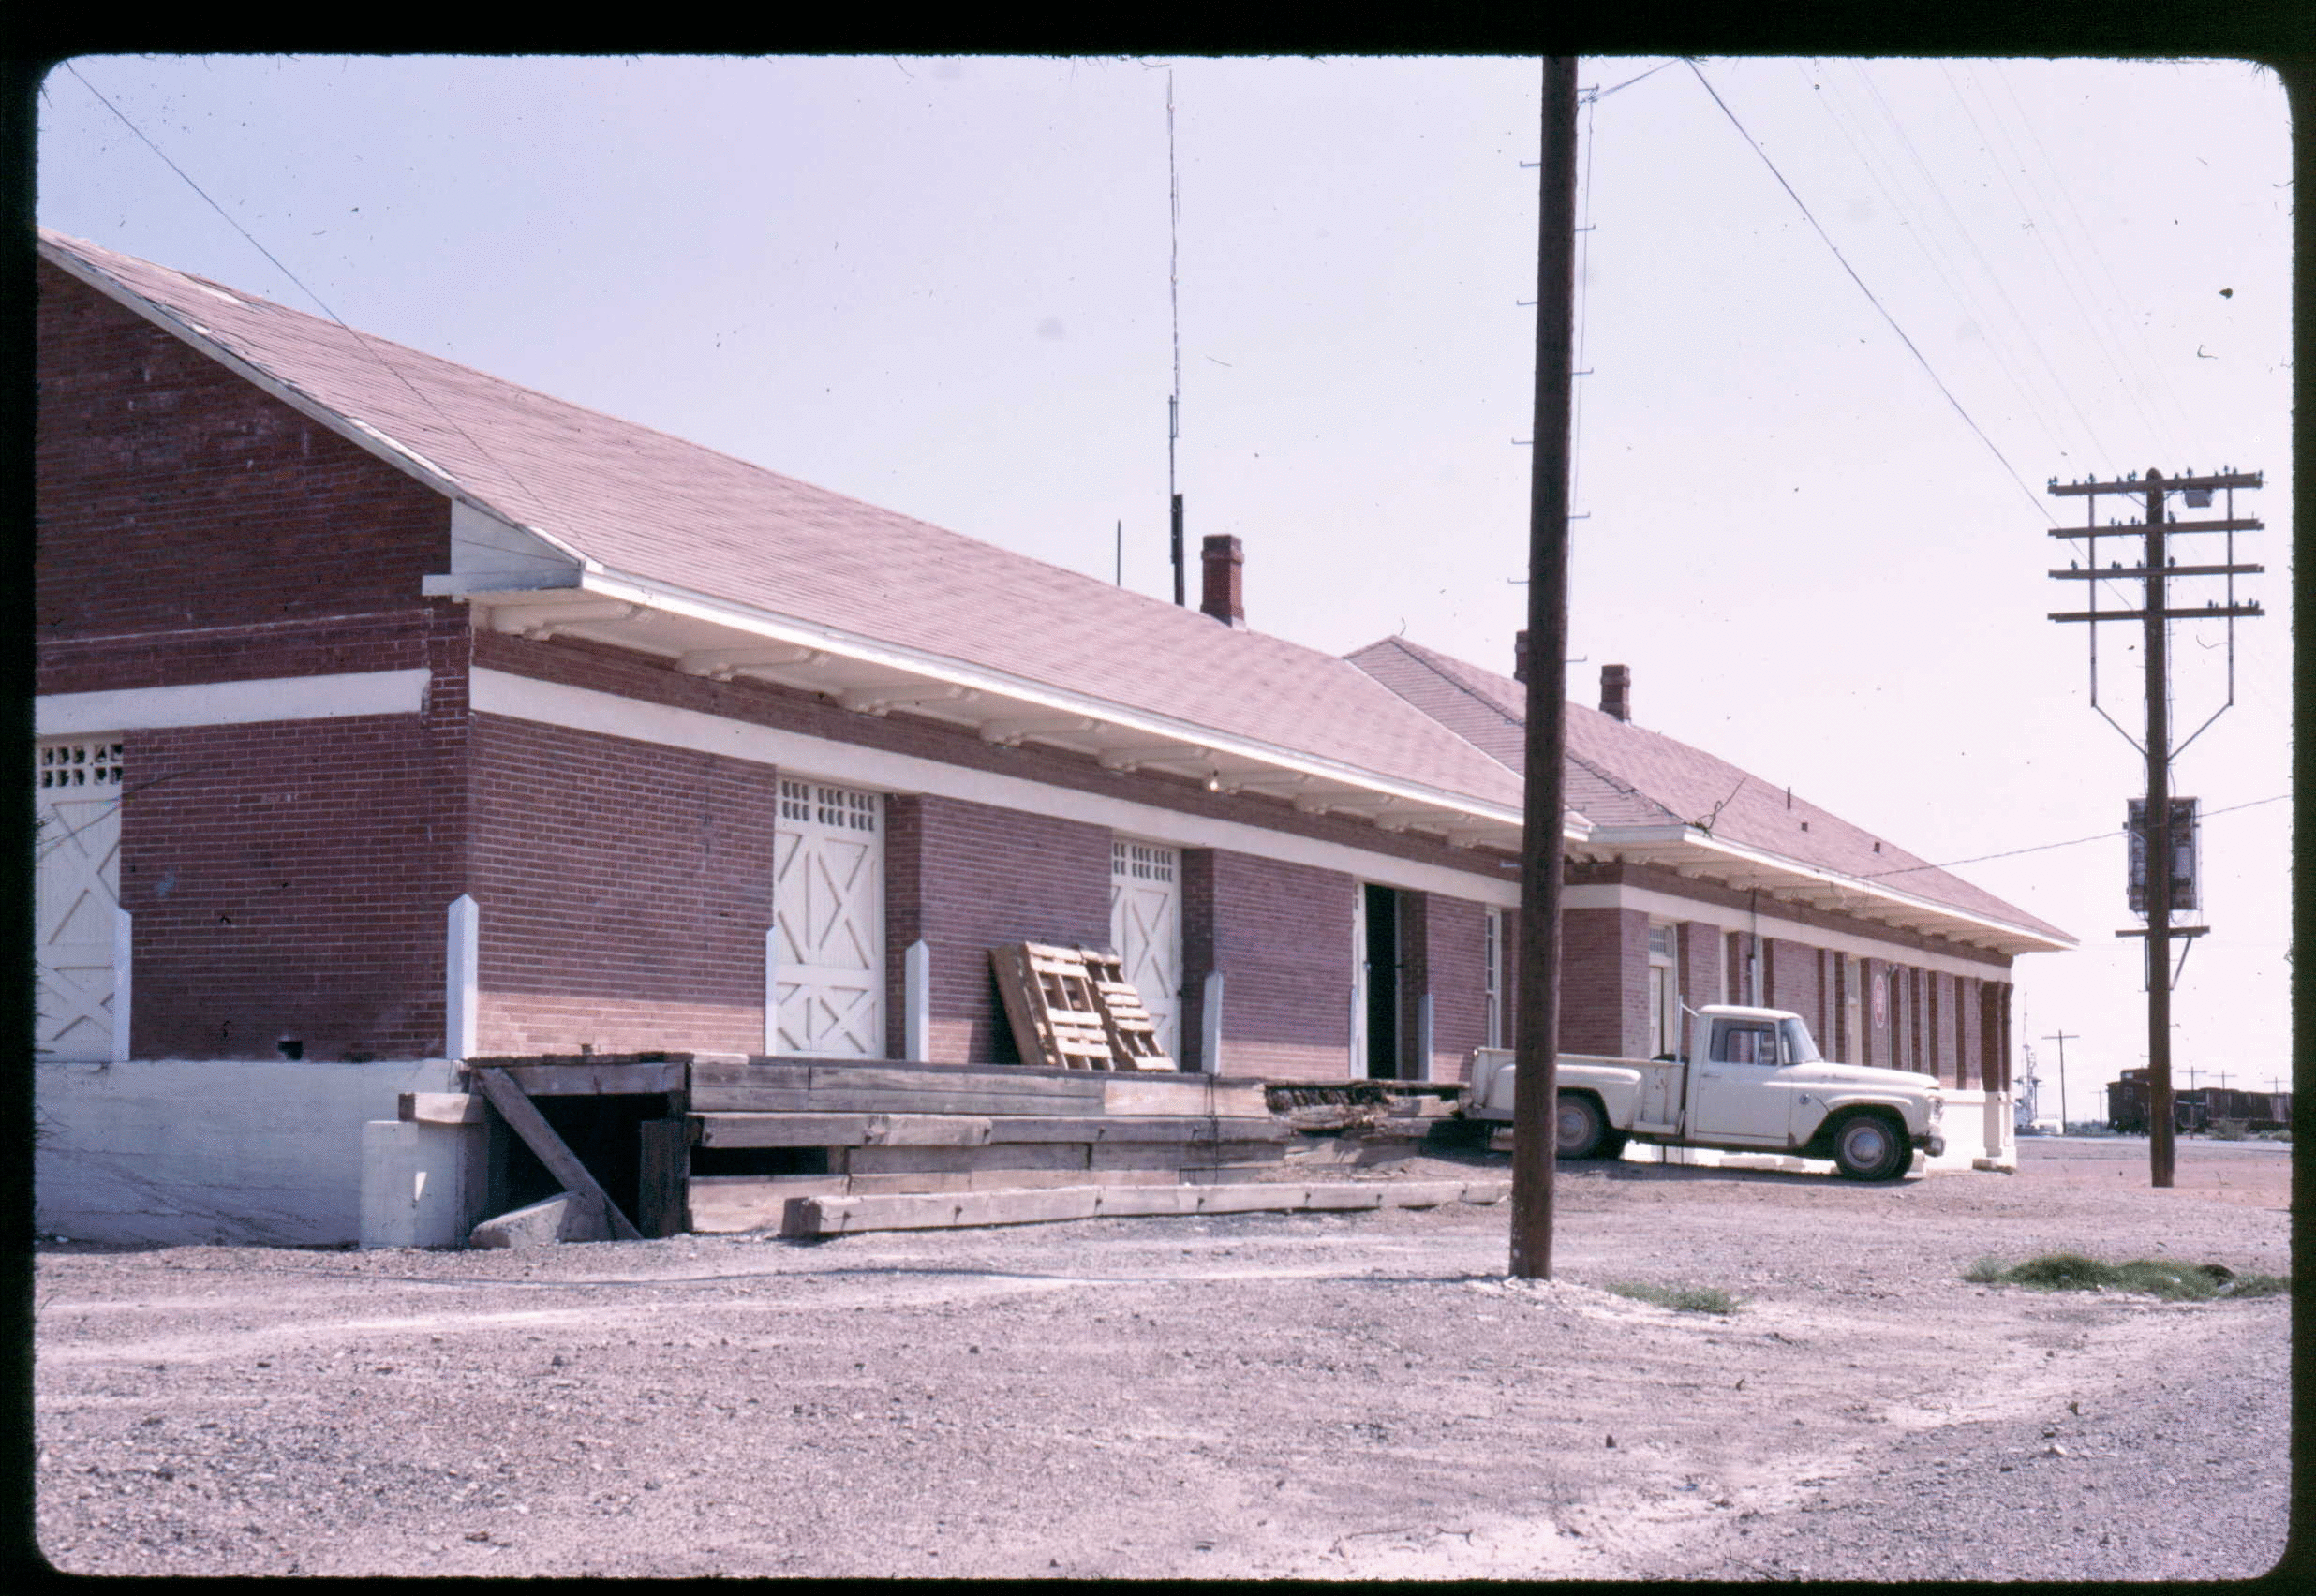 Images of Texas & Pacific Stations and Structures in  Pecos, TX